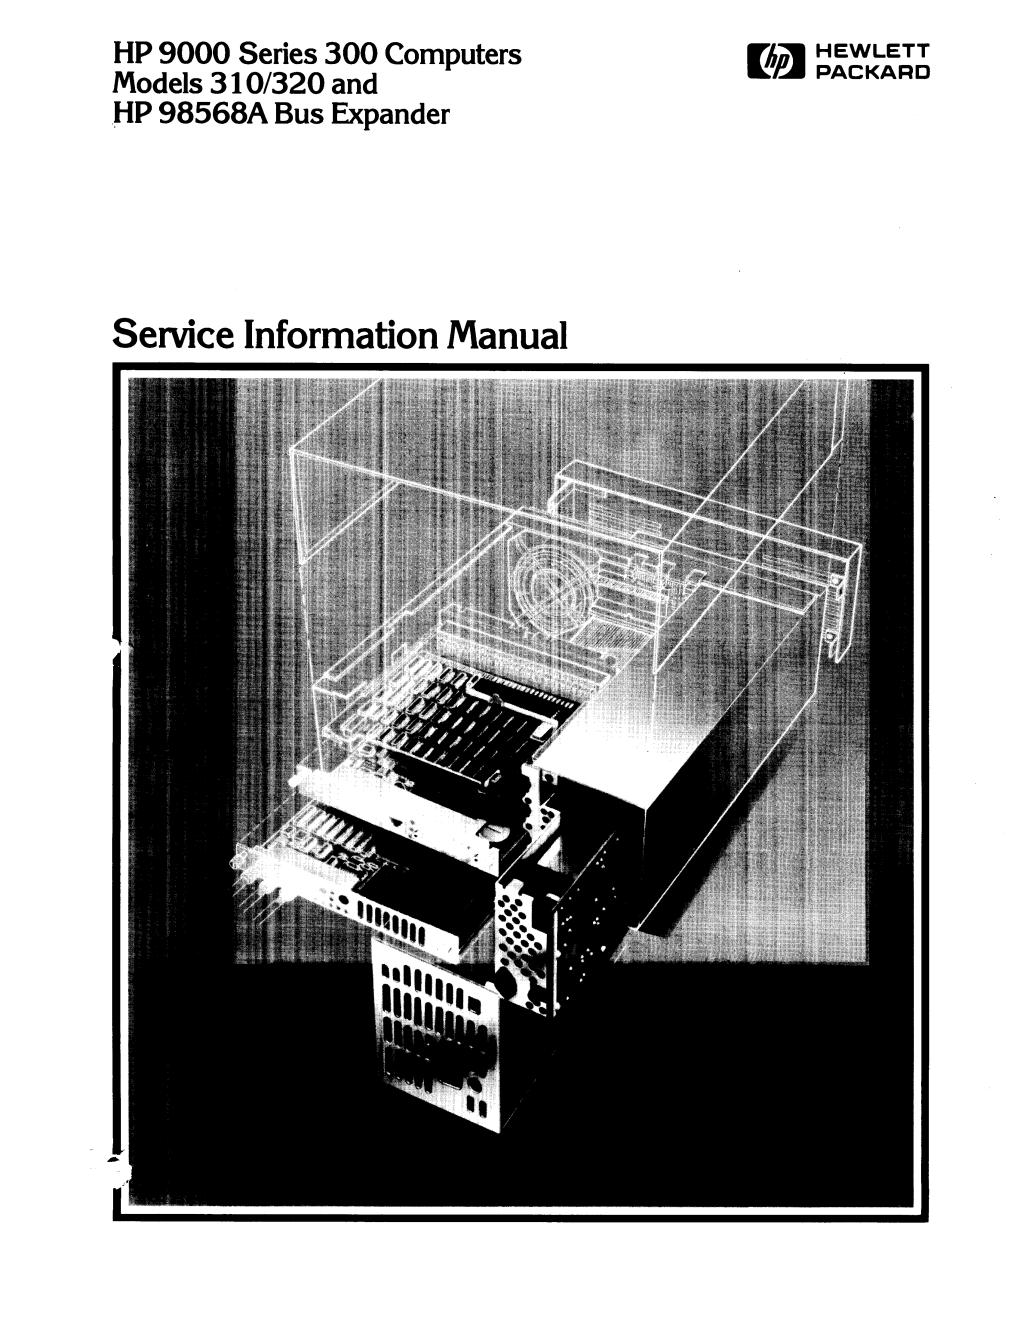 Service Information Manual for HP 9000 Series 300 Computers Model 310/320 and HP 98568A Bus Expander